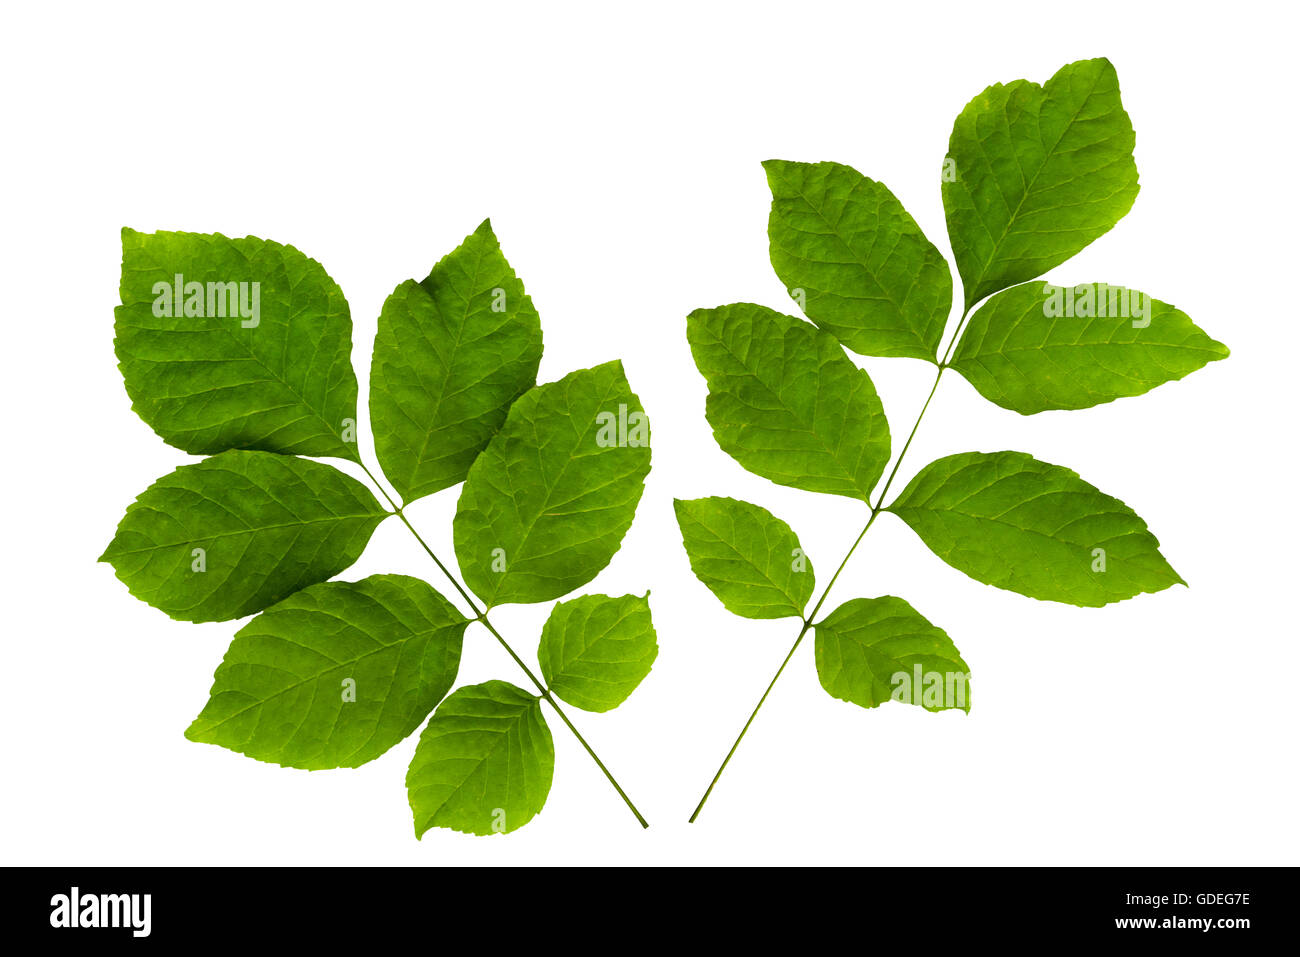 White ash leaves close up cut out Stock Photo